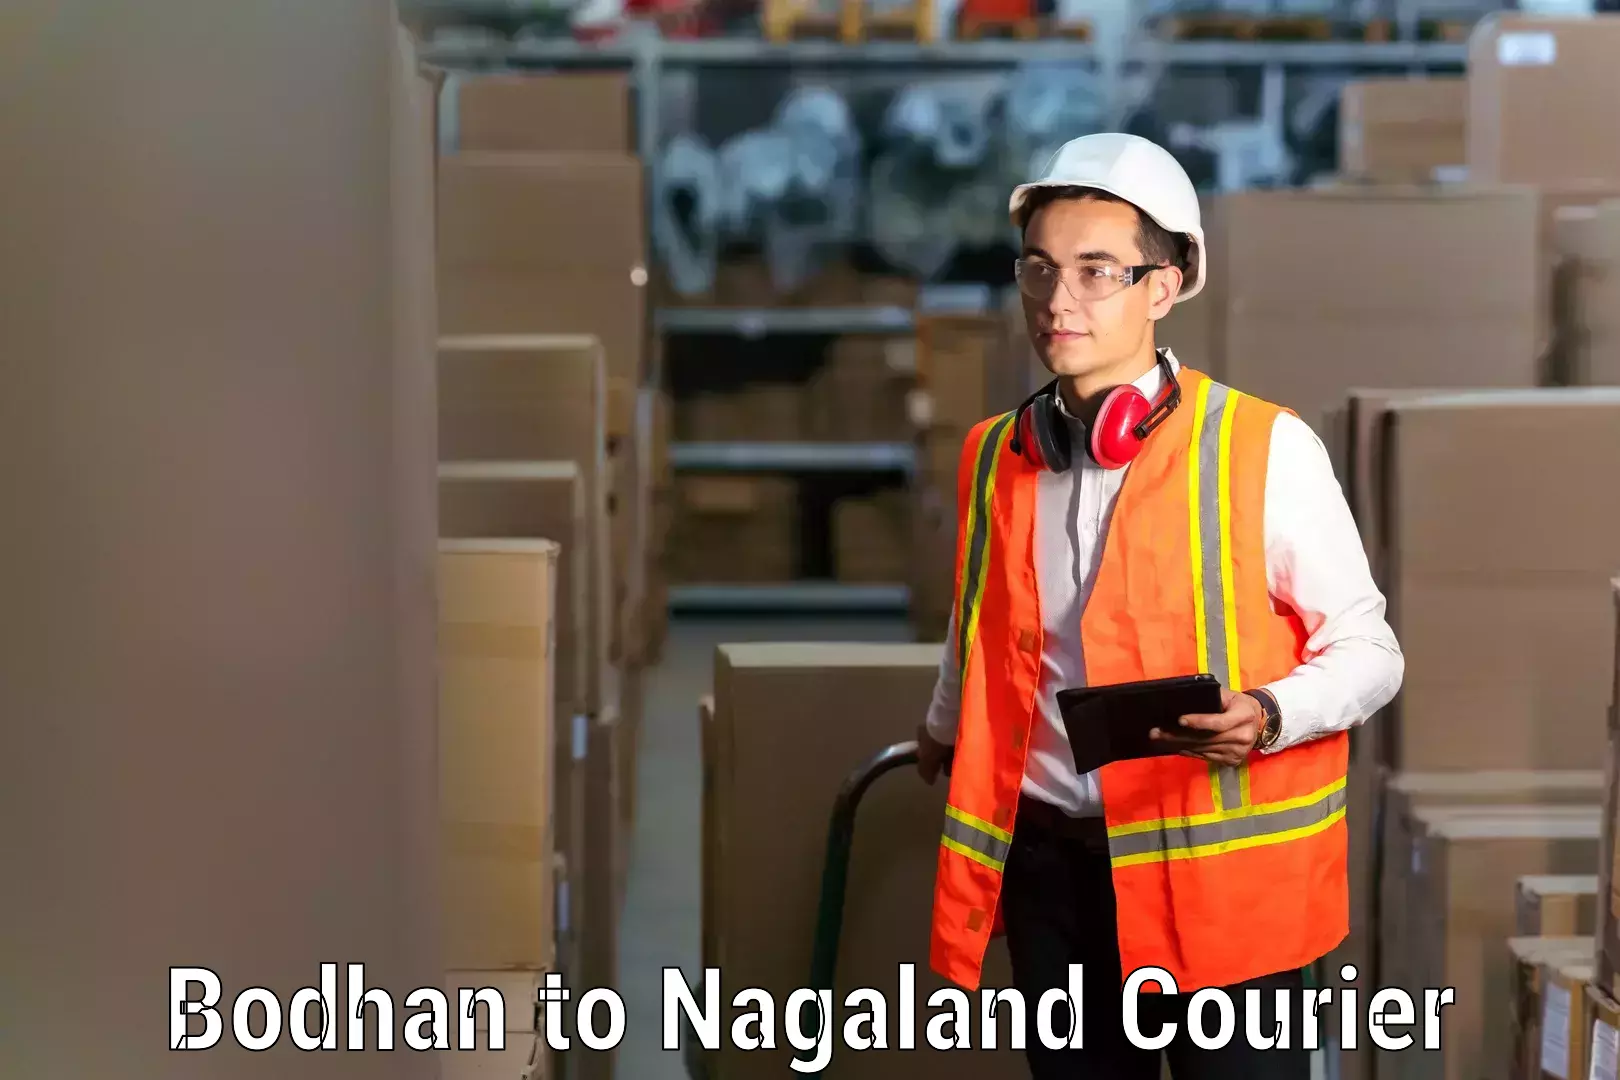 Furniture transport specialists Bodhan to NIT Nagaland